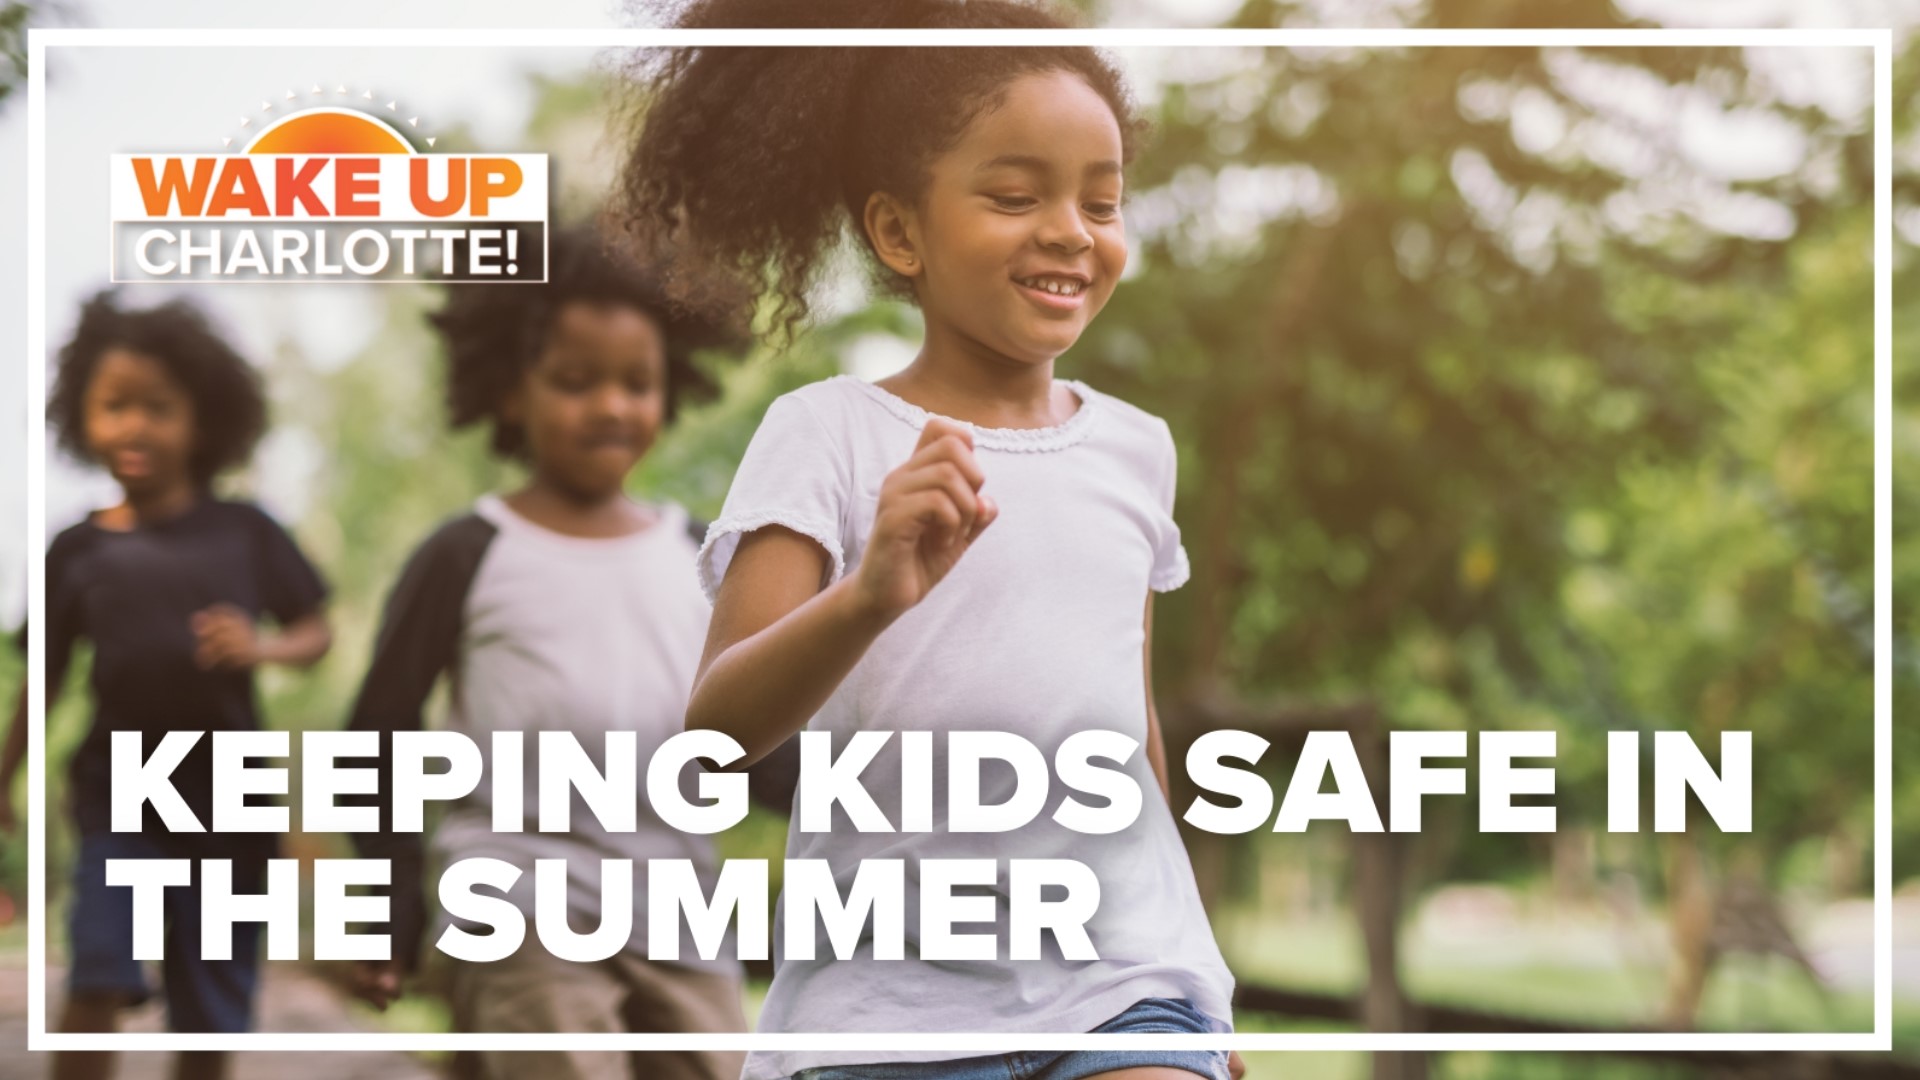 This week marks the first week of summer, and it's important that you move with caution when out in the sun.